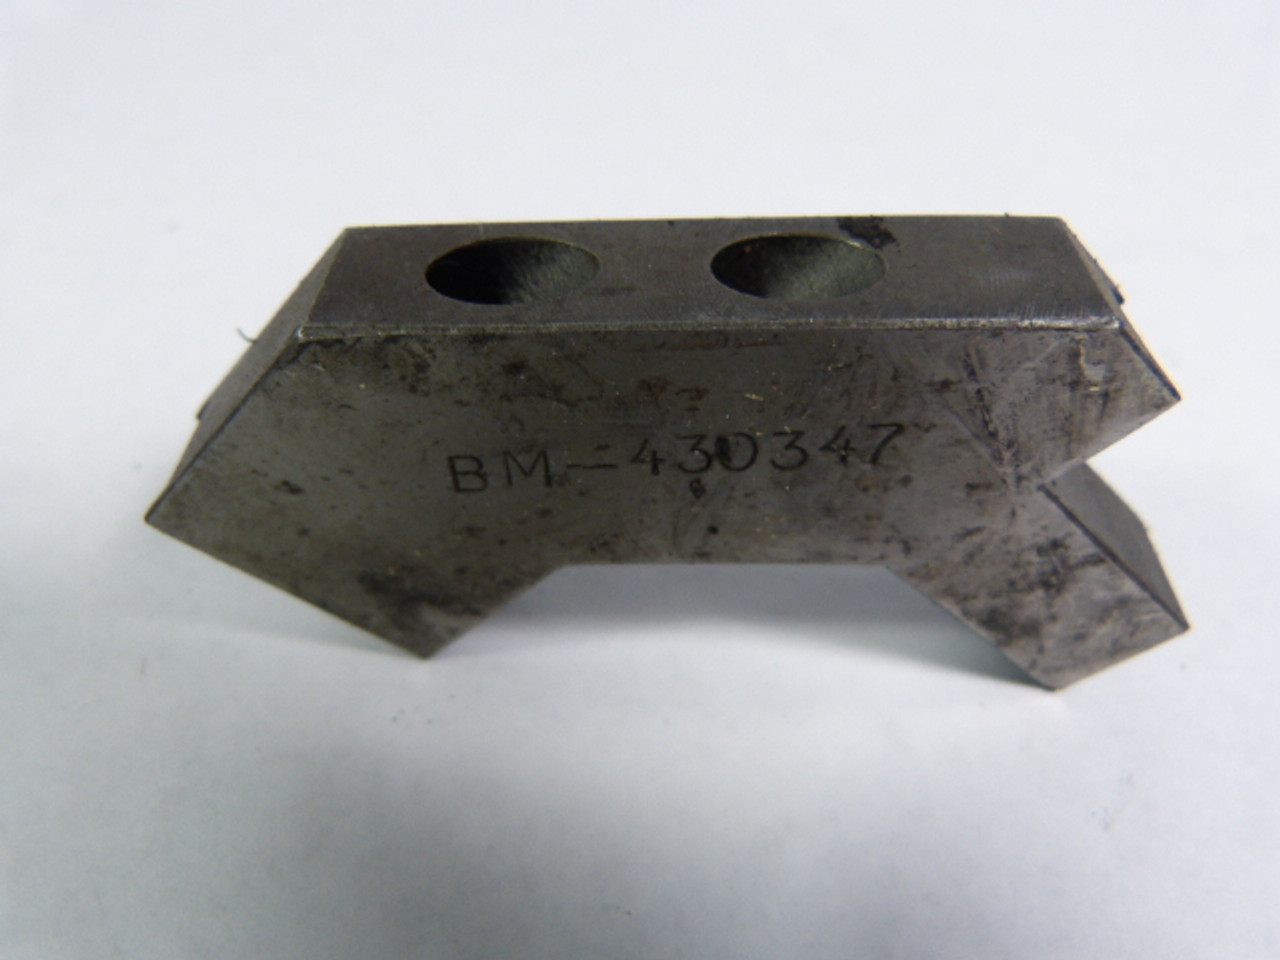 Huron Machine Products BM-430347-1 Chuck Jaw Accessory USED